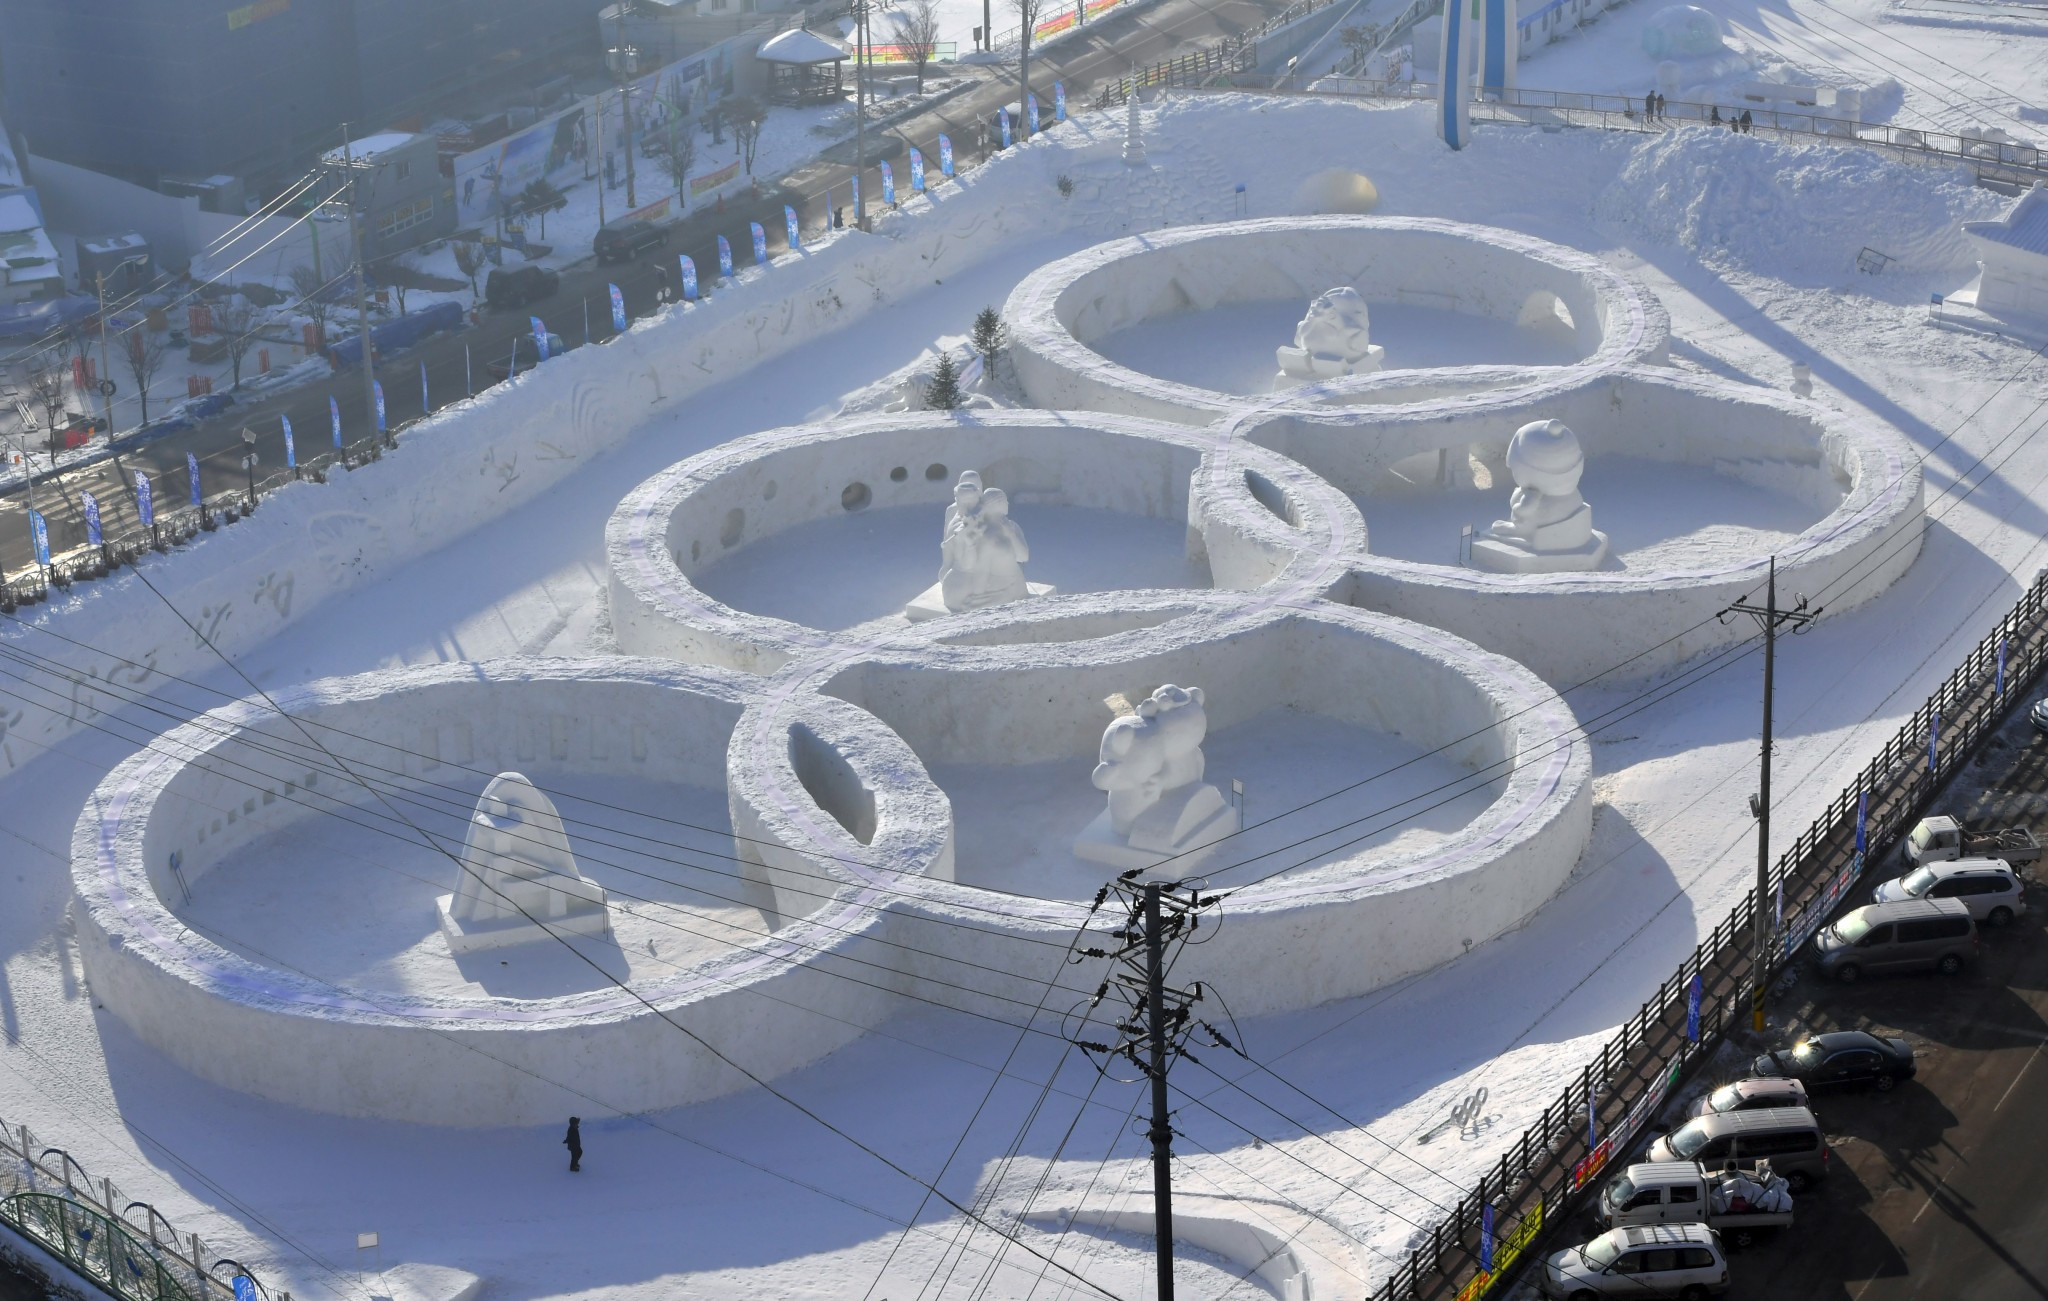 WinterFest will celebrate US athletes and the Pyeongchang 2018 Winter Olympic and Paralympic Games ©Getty Images